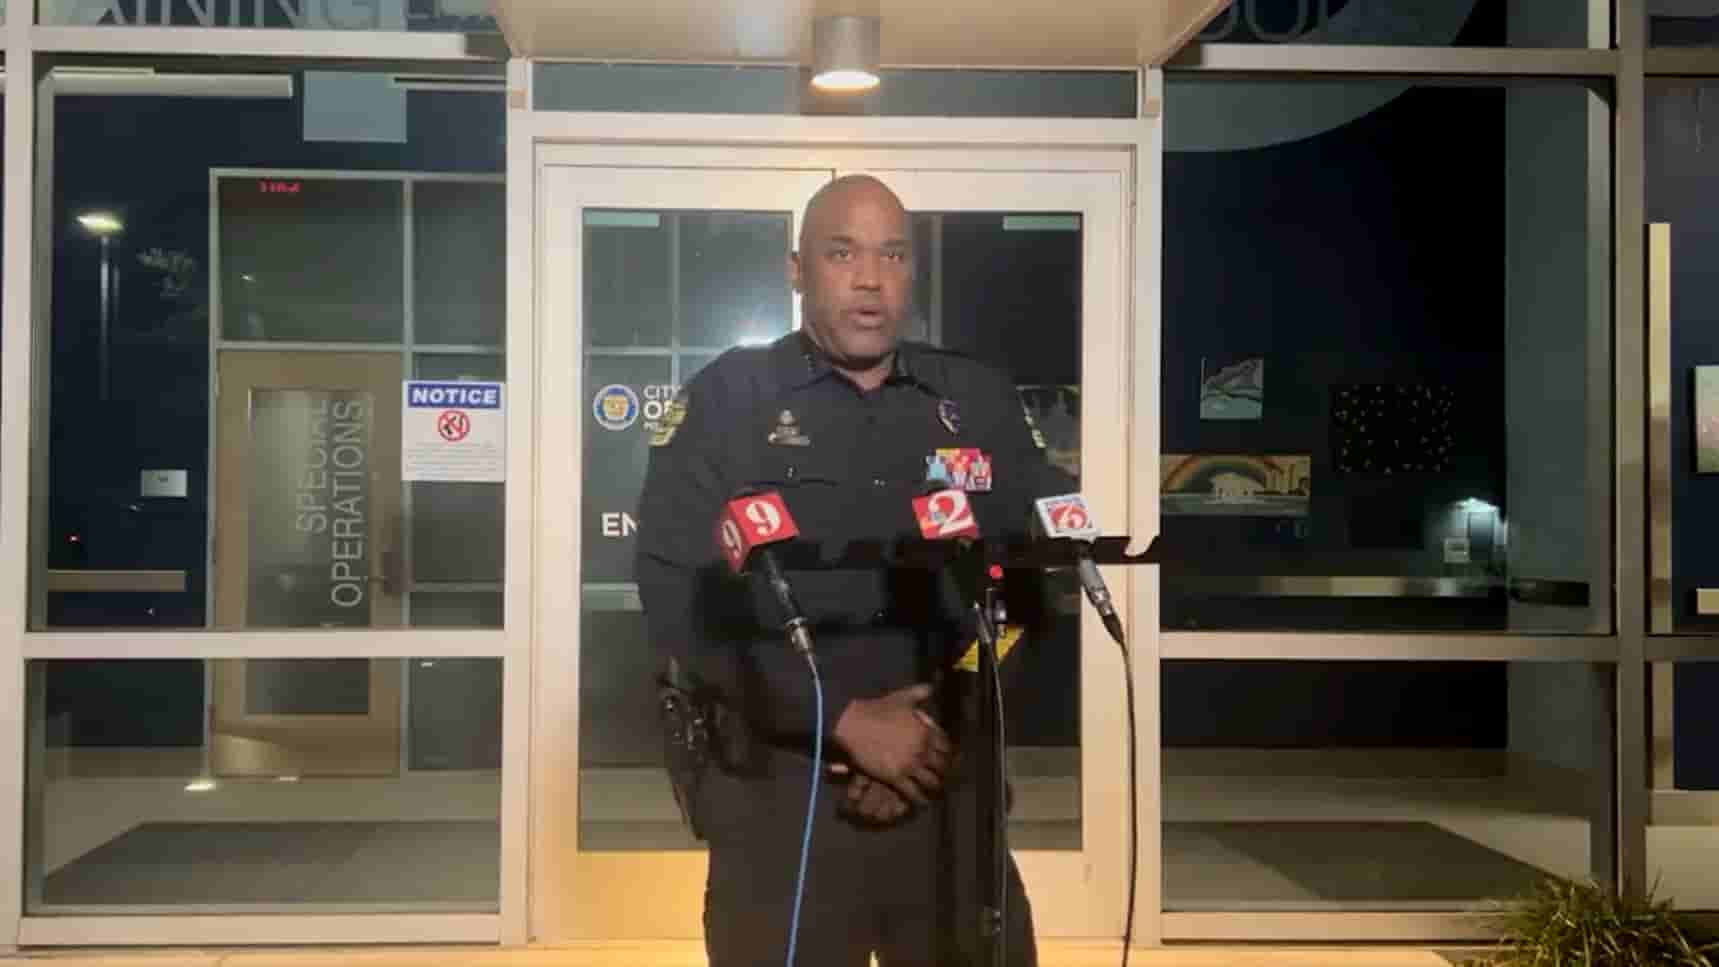 A child and two adults were shot to death in a domestic violence incident, at 2:25 am Sunday in Orlando. The suspect was shot and then died in an officer-involved shooting after firing the police officers of Orlando Police. 